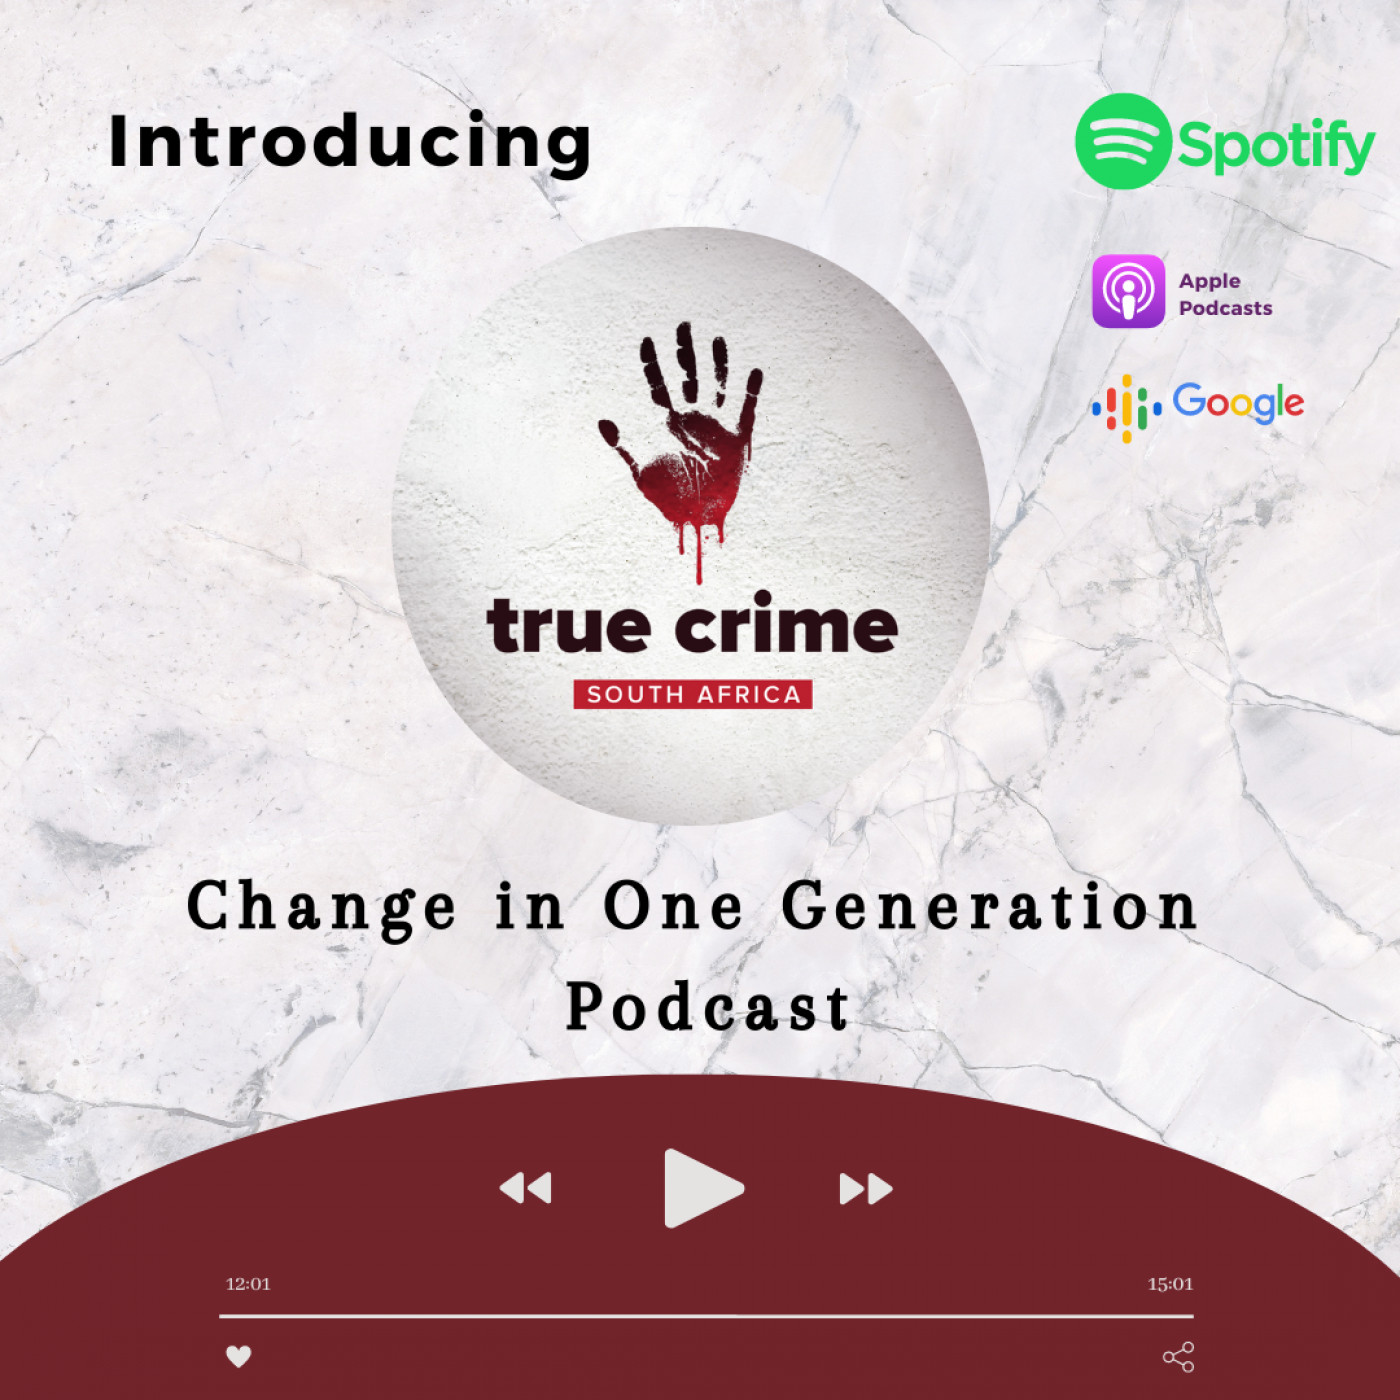 Introducing: Change in One Generation podcast